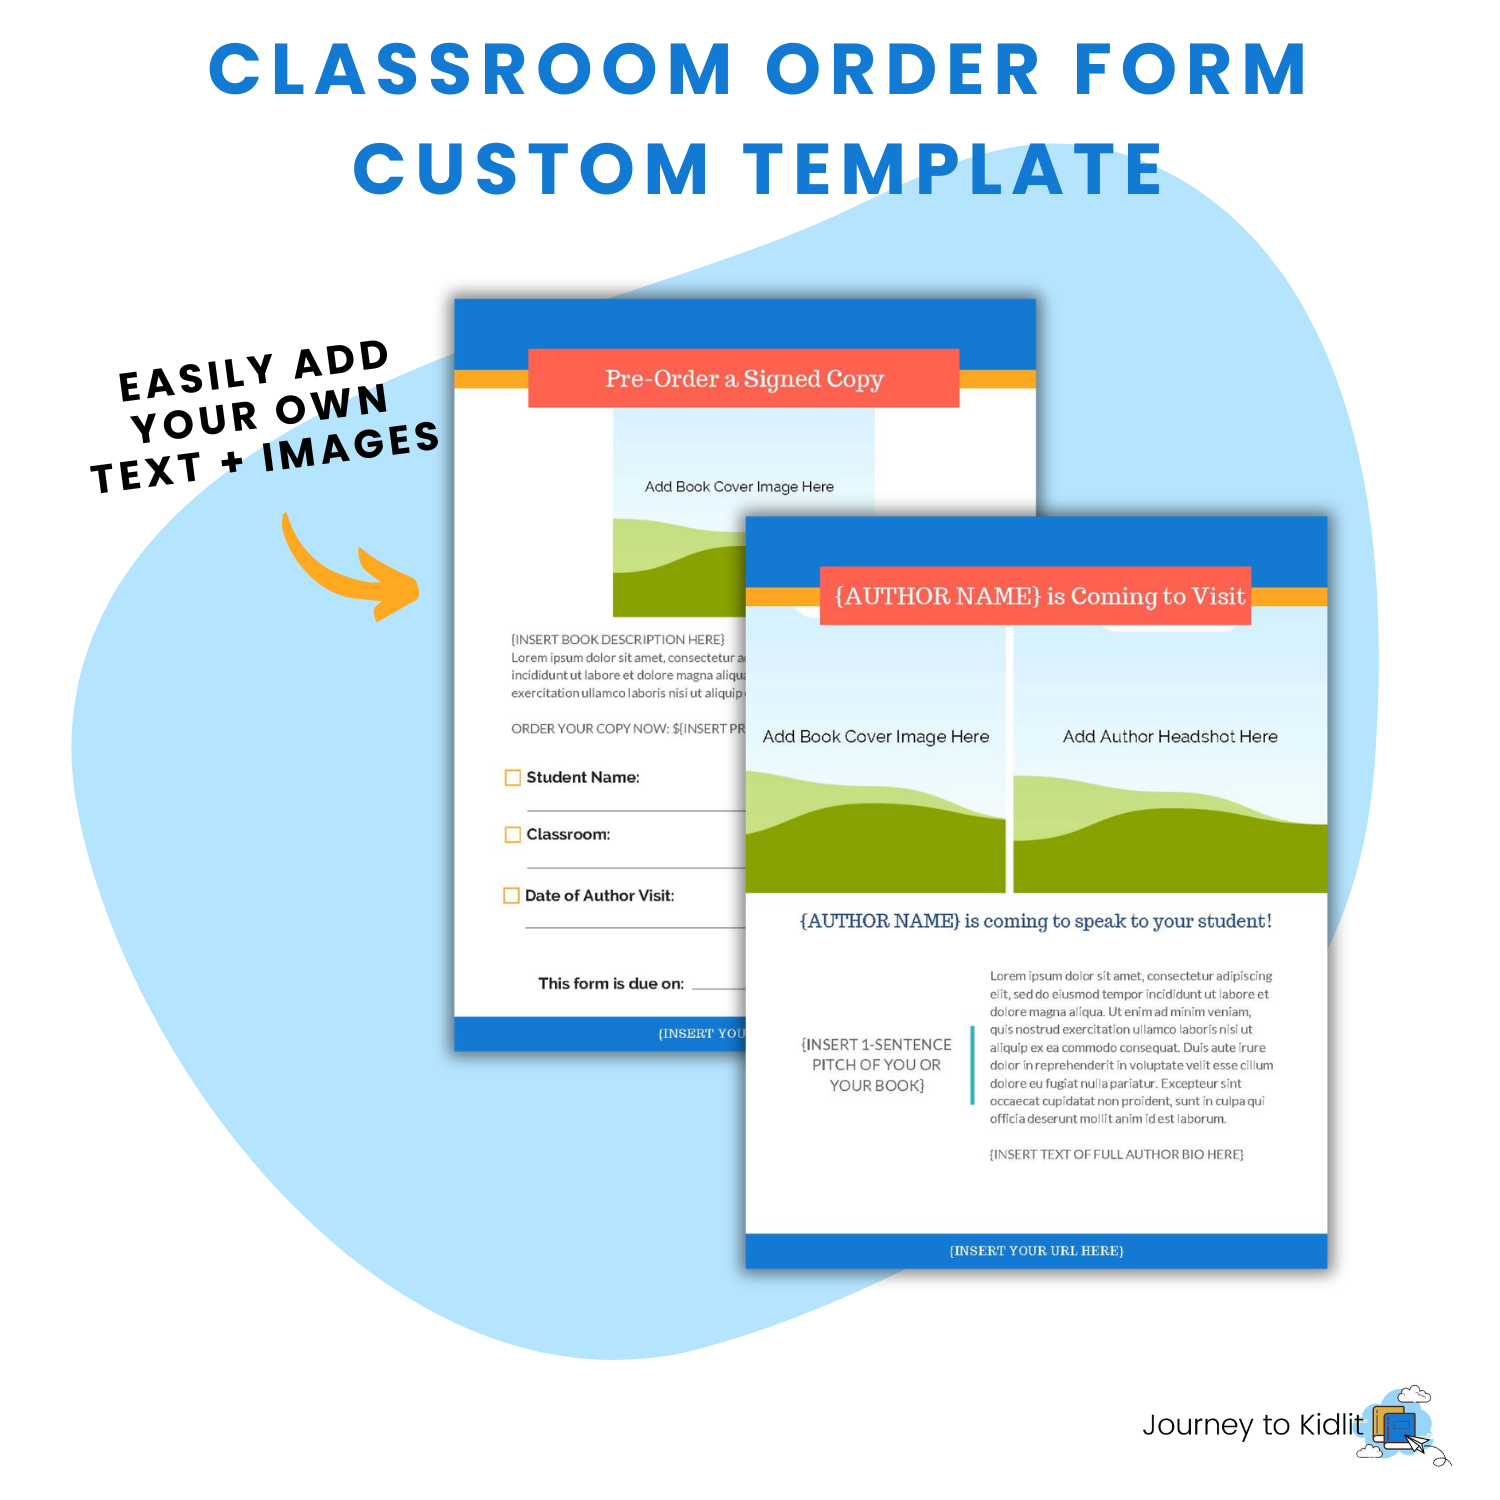 Get prepared for a school visit with this classroom template pack just for authors